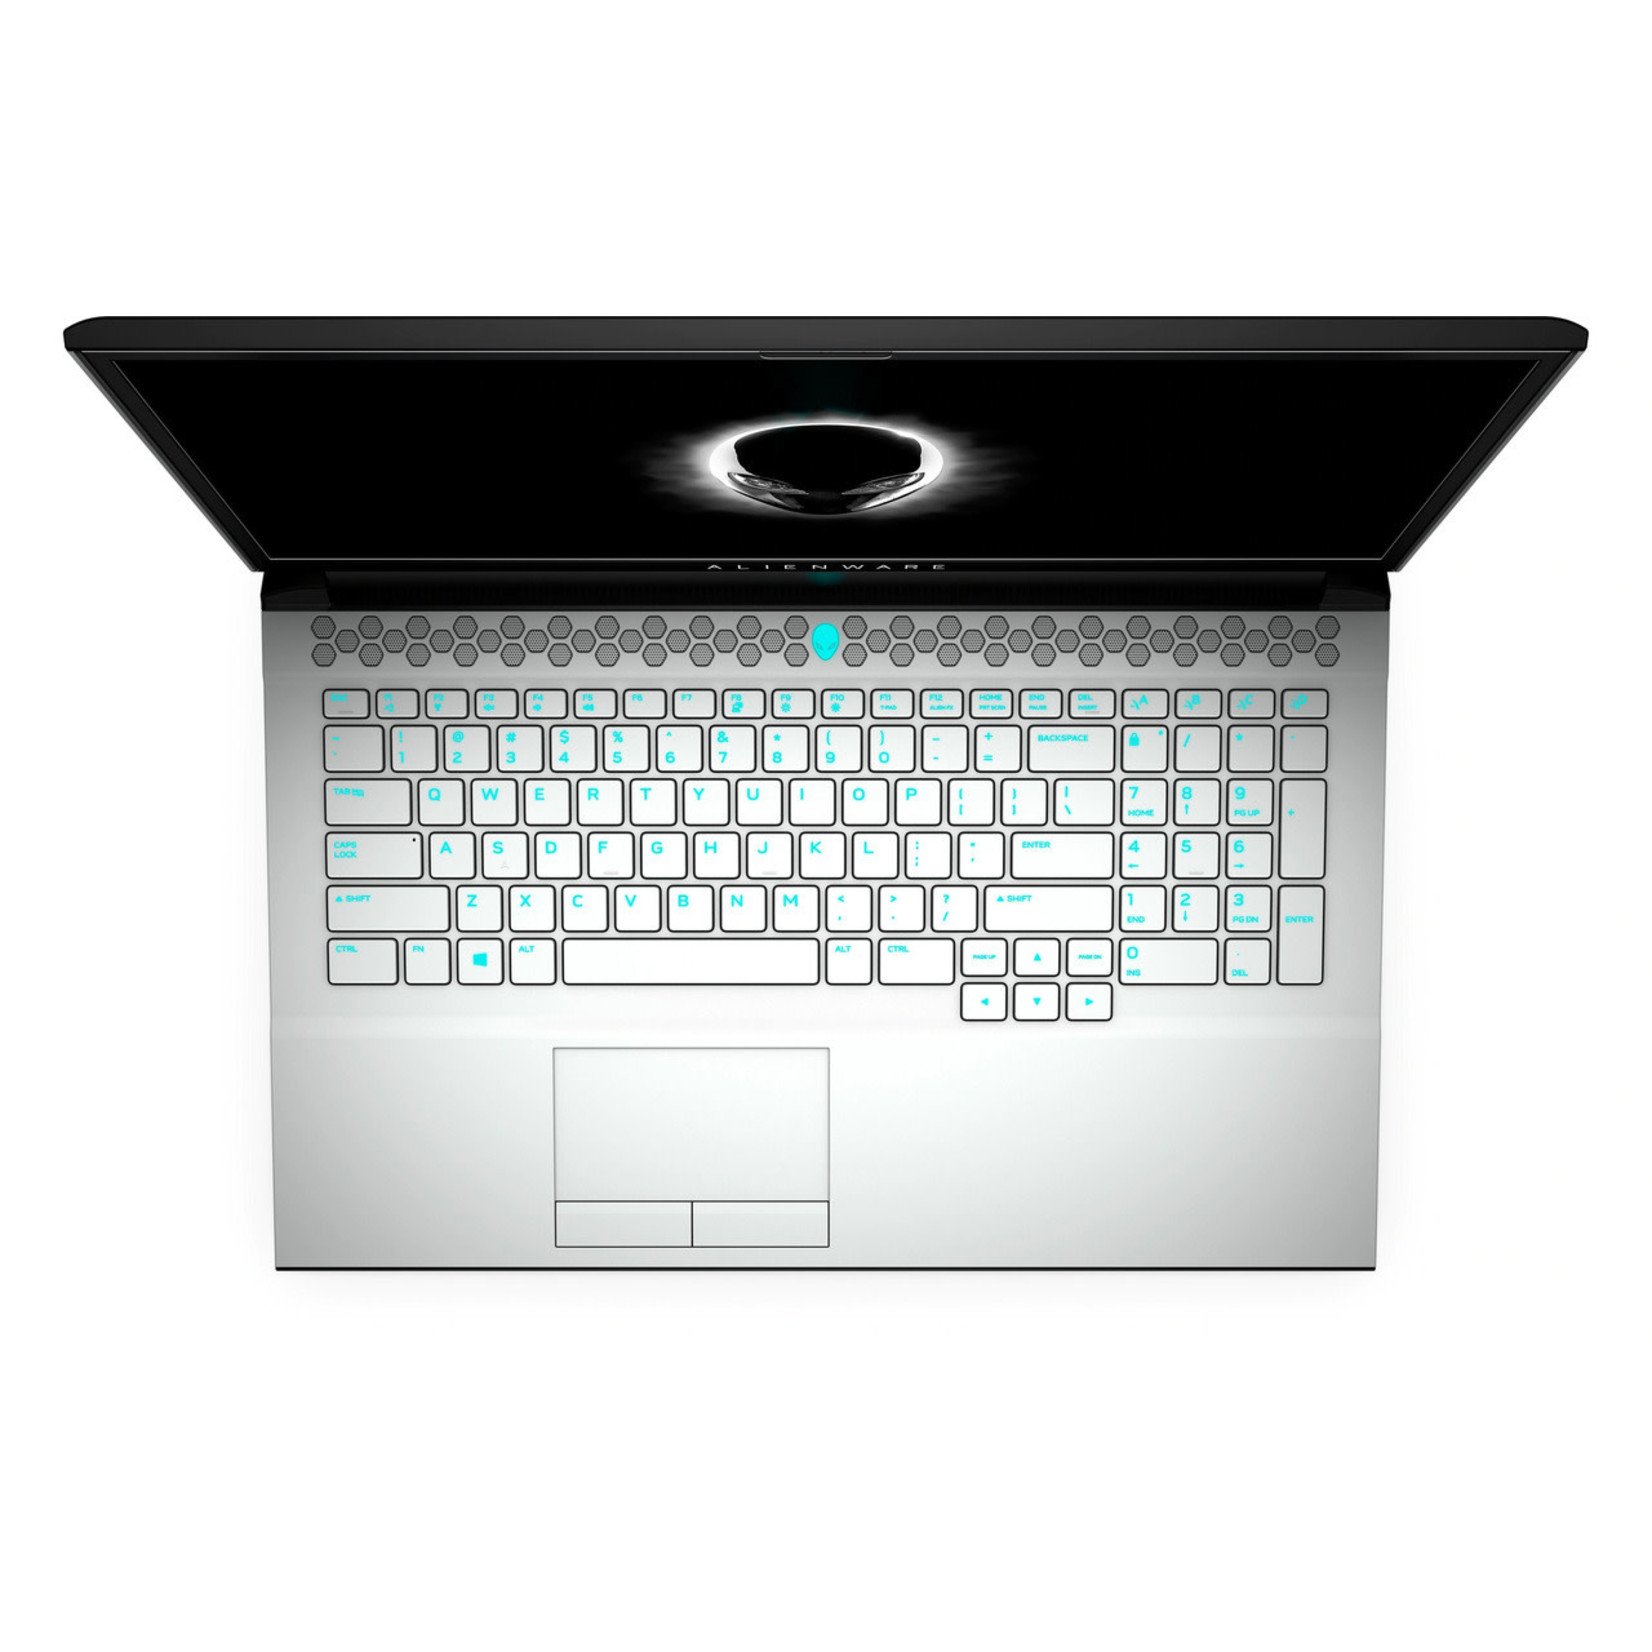 Dell Dell Alienware Area-51m R2 8C / i7 / 16GB / 512 GB SSD / VR Ready / 17.3-inch FHD Display / NVIDIA GeForce RTX 2070 Super 8GB DDR6 with 4-year Dell Pro Support Plus